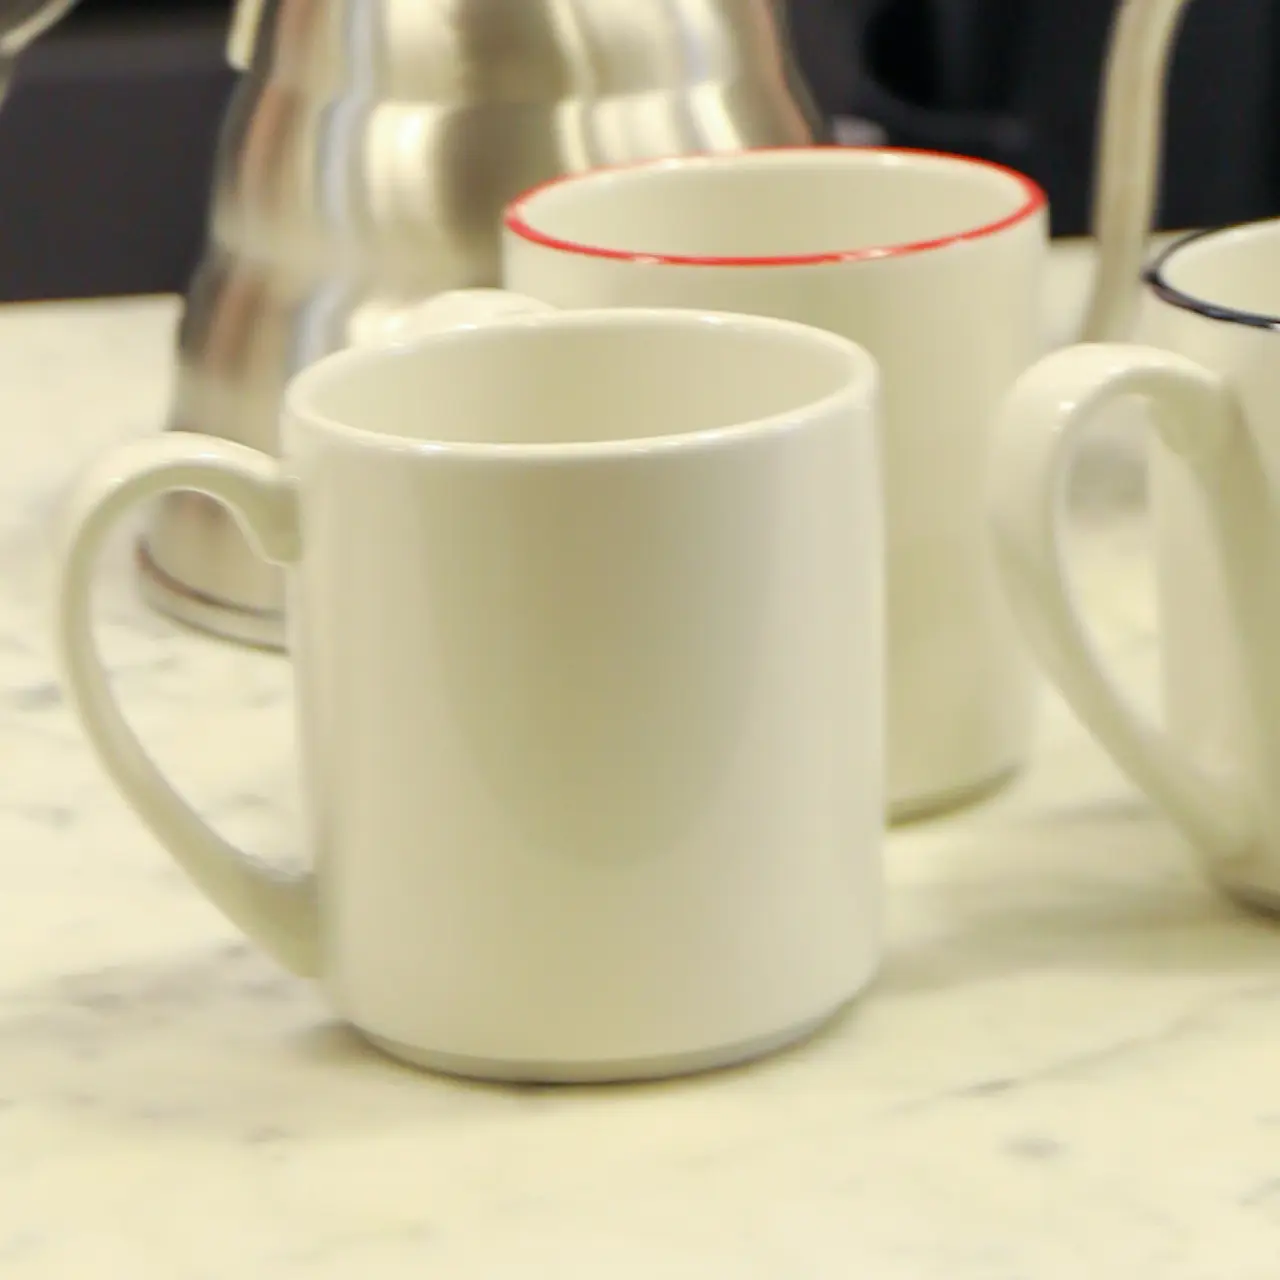 Three white mugs sit on a countertop with a stainless steel kettle in the background.